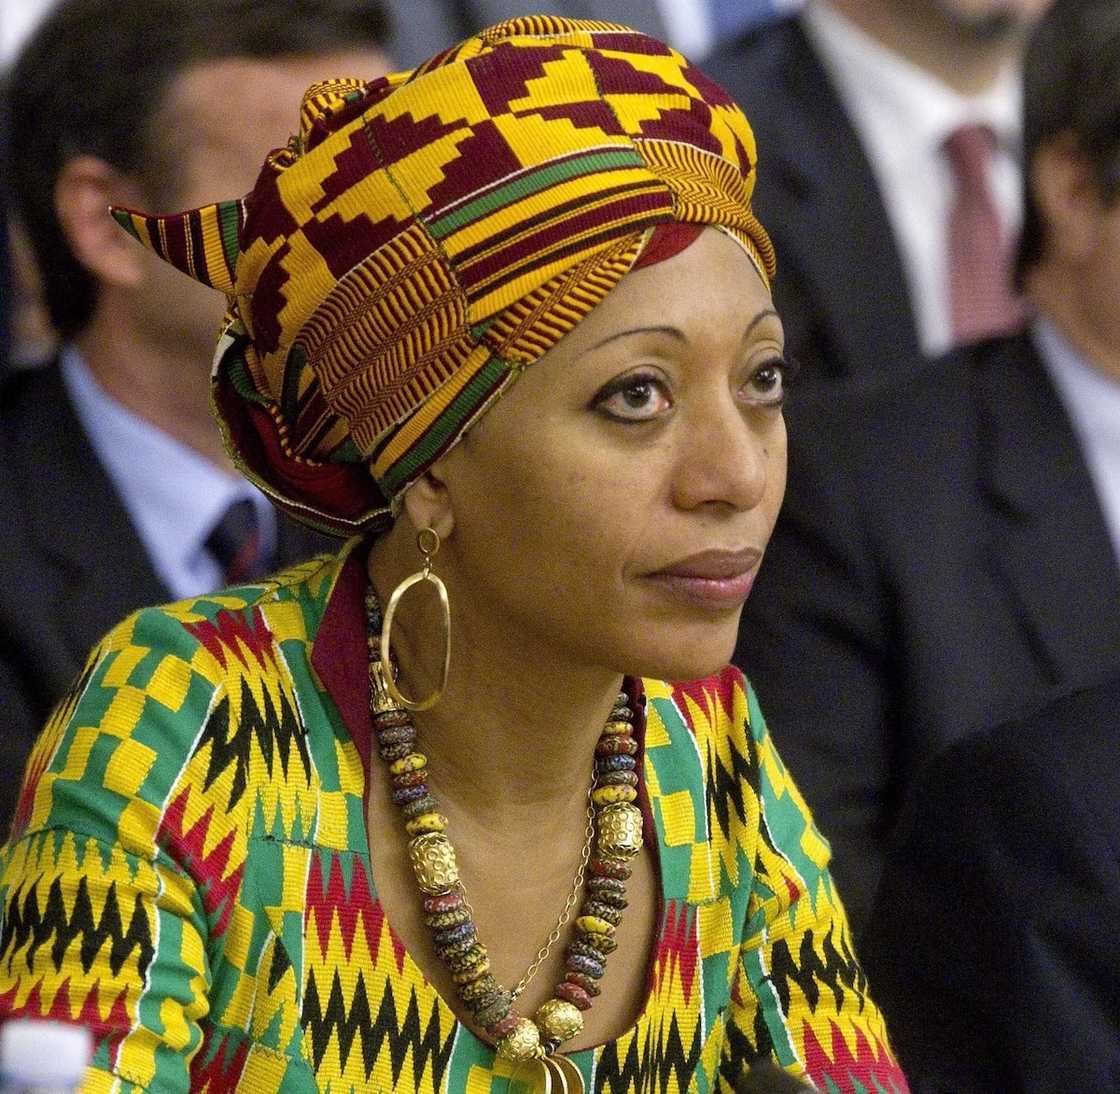 “My Father Would Not Have Denied Onsy”- Samia Nkrumah